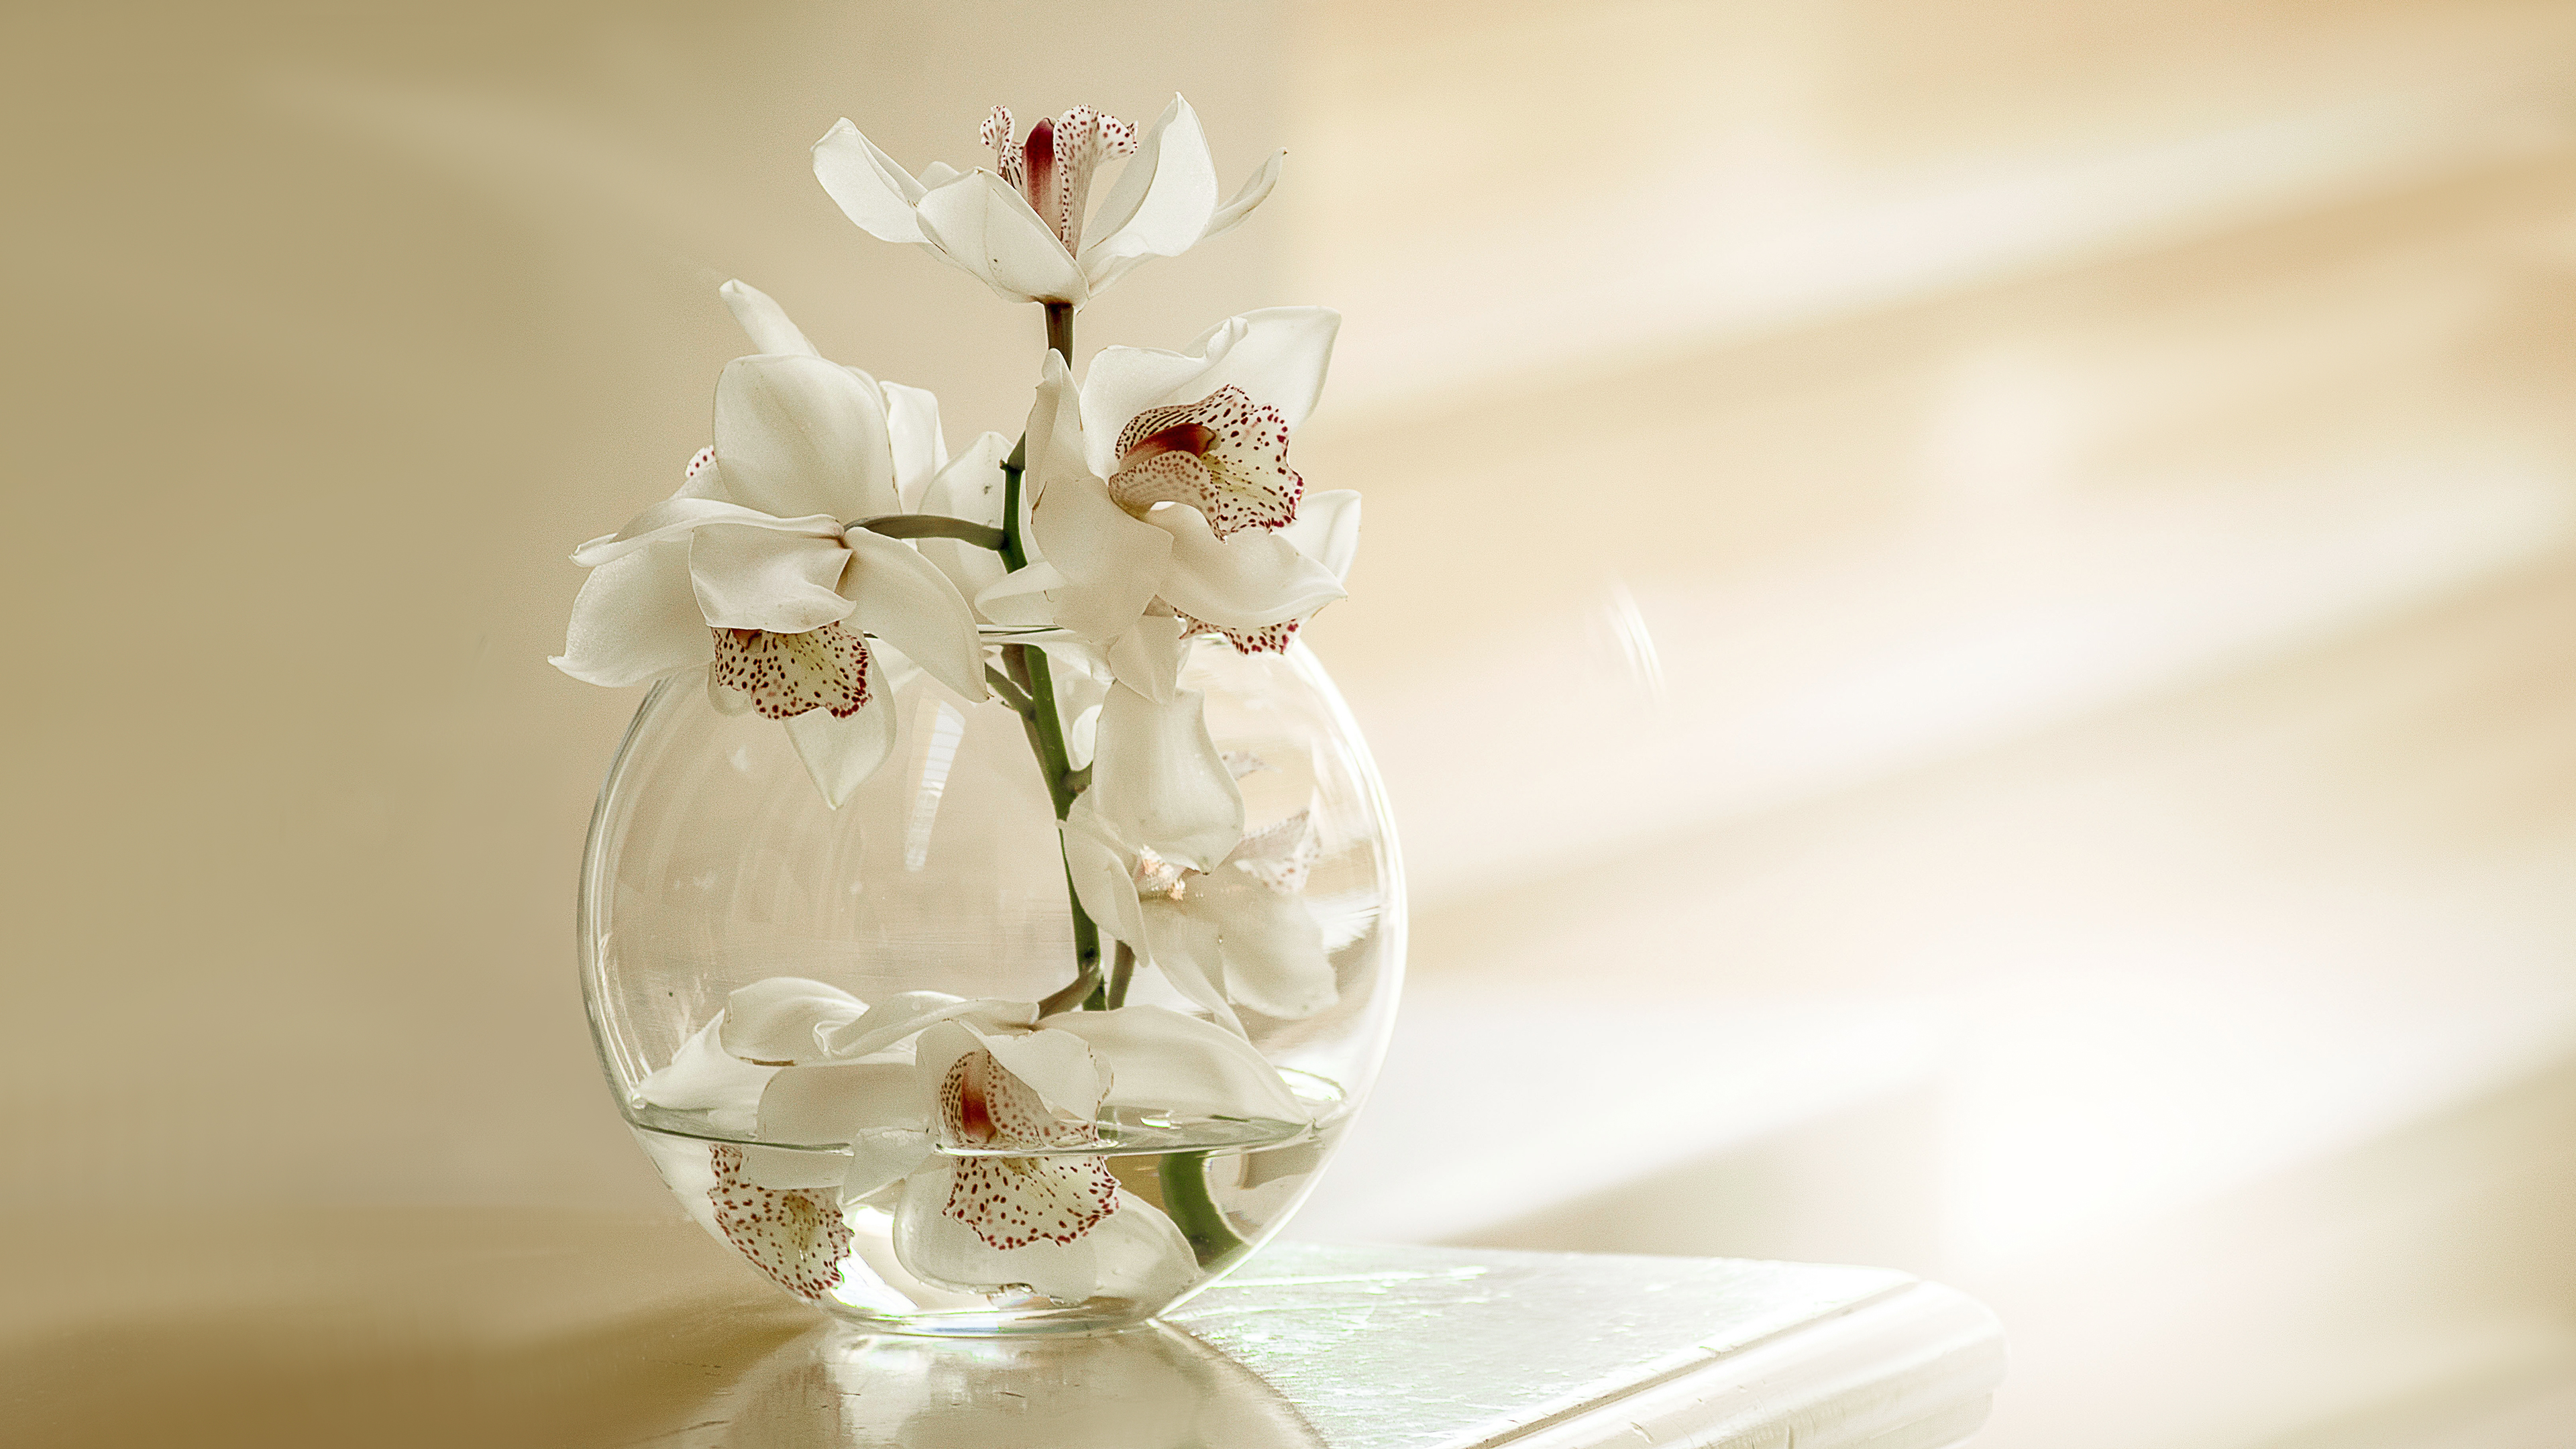 3840x2160 White Orchid Flowers 4K Wallpaper | 3840 x 2160 px